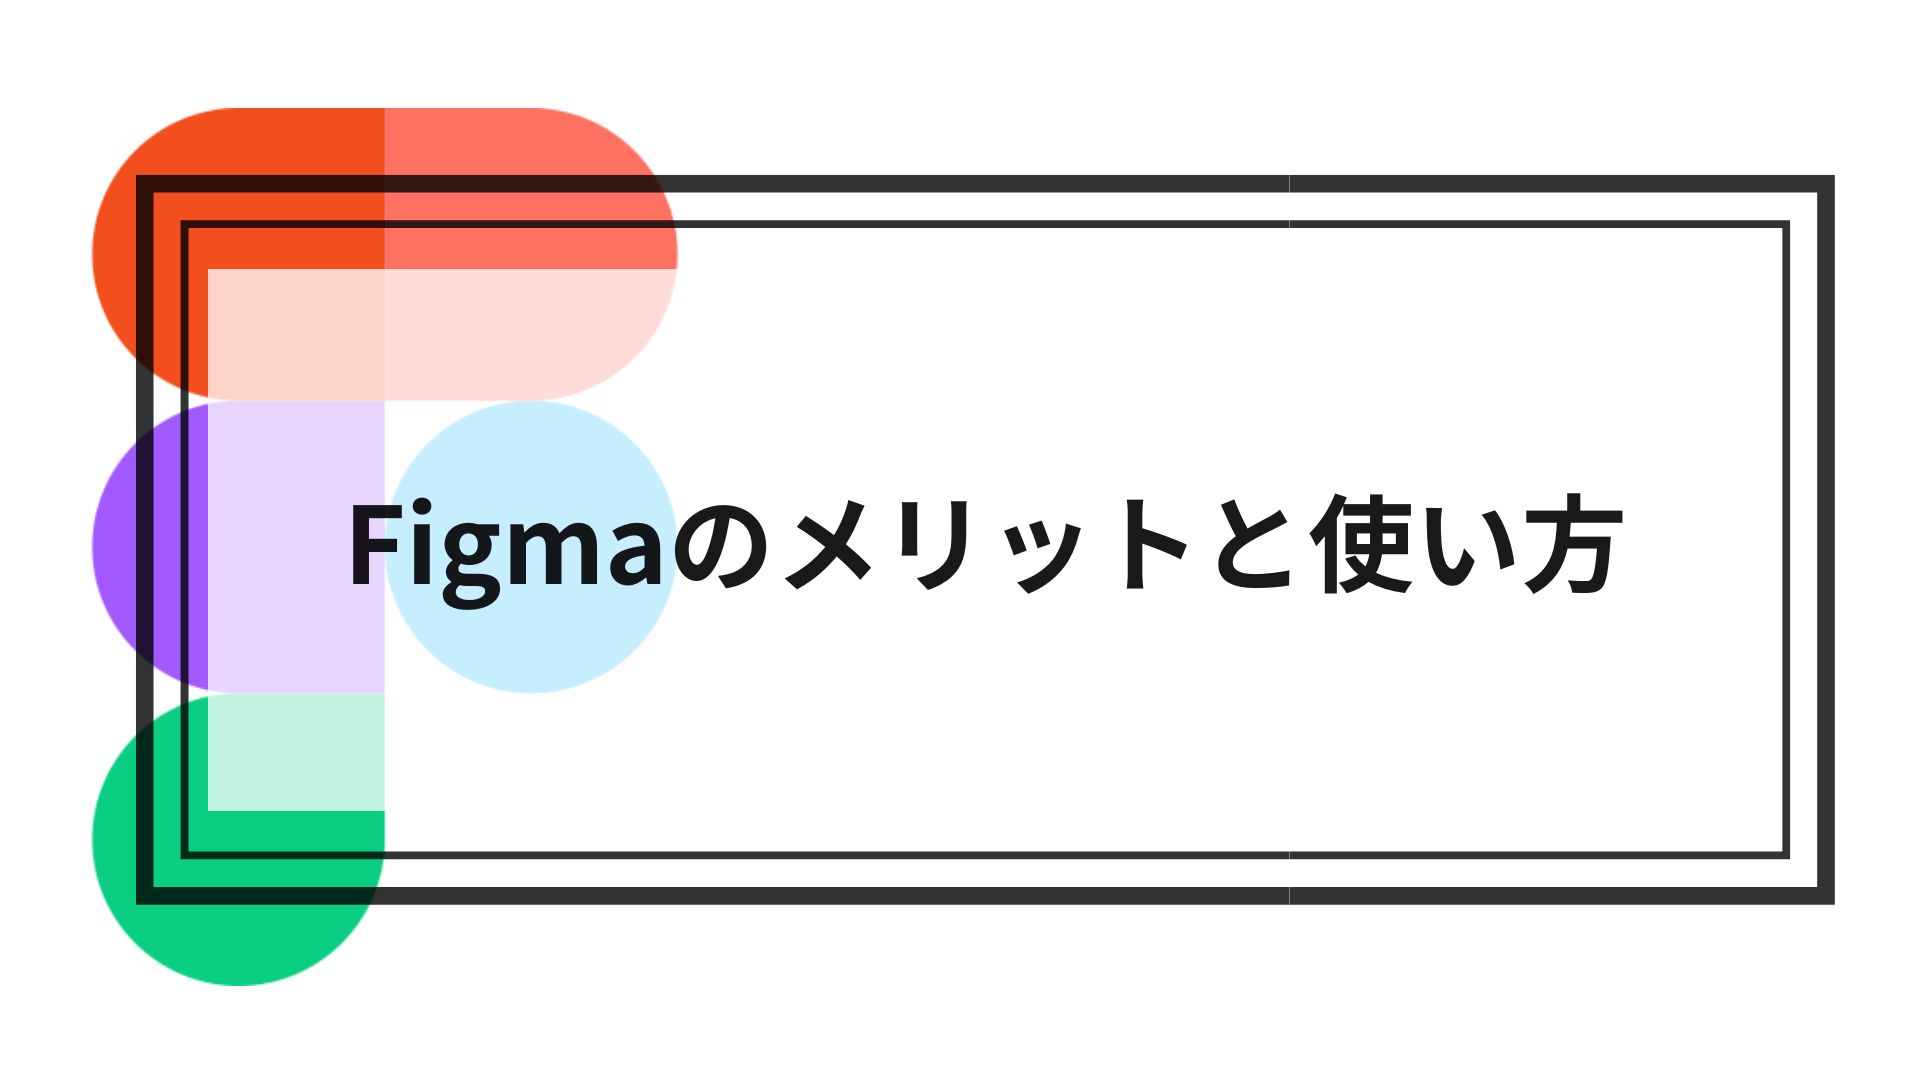 Figma merit and how to use